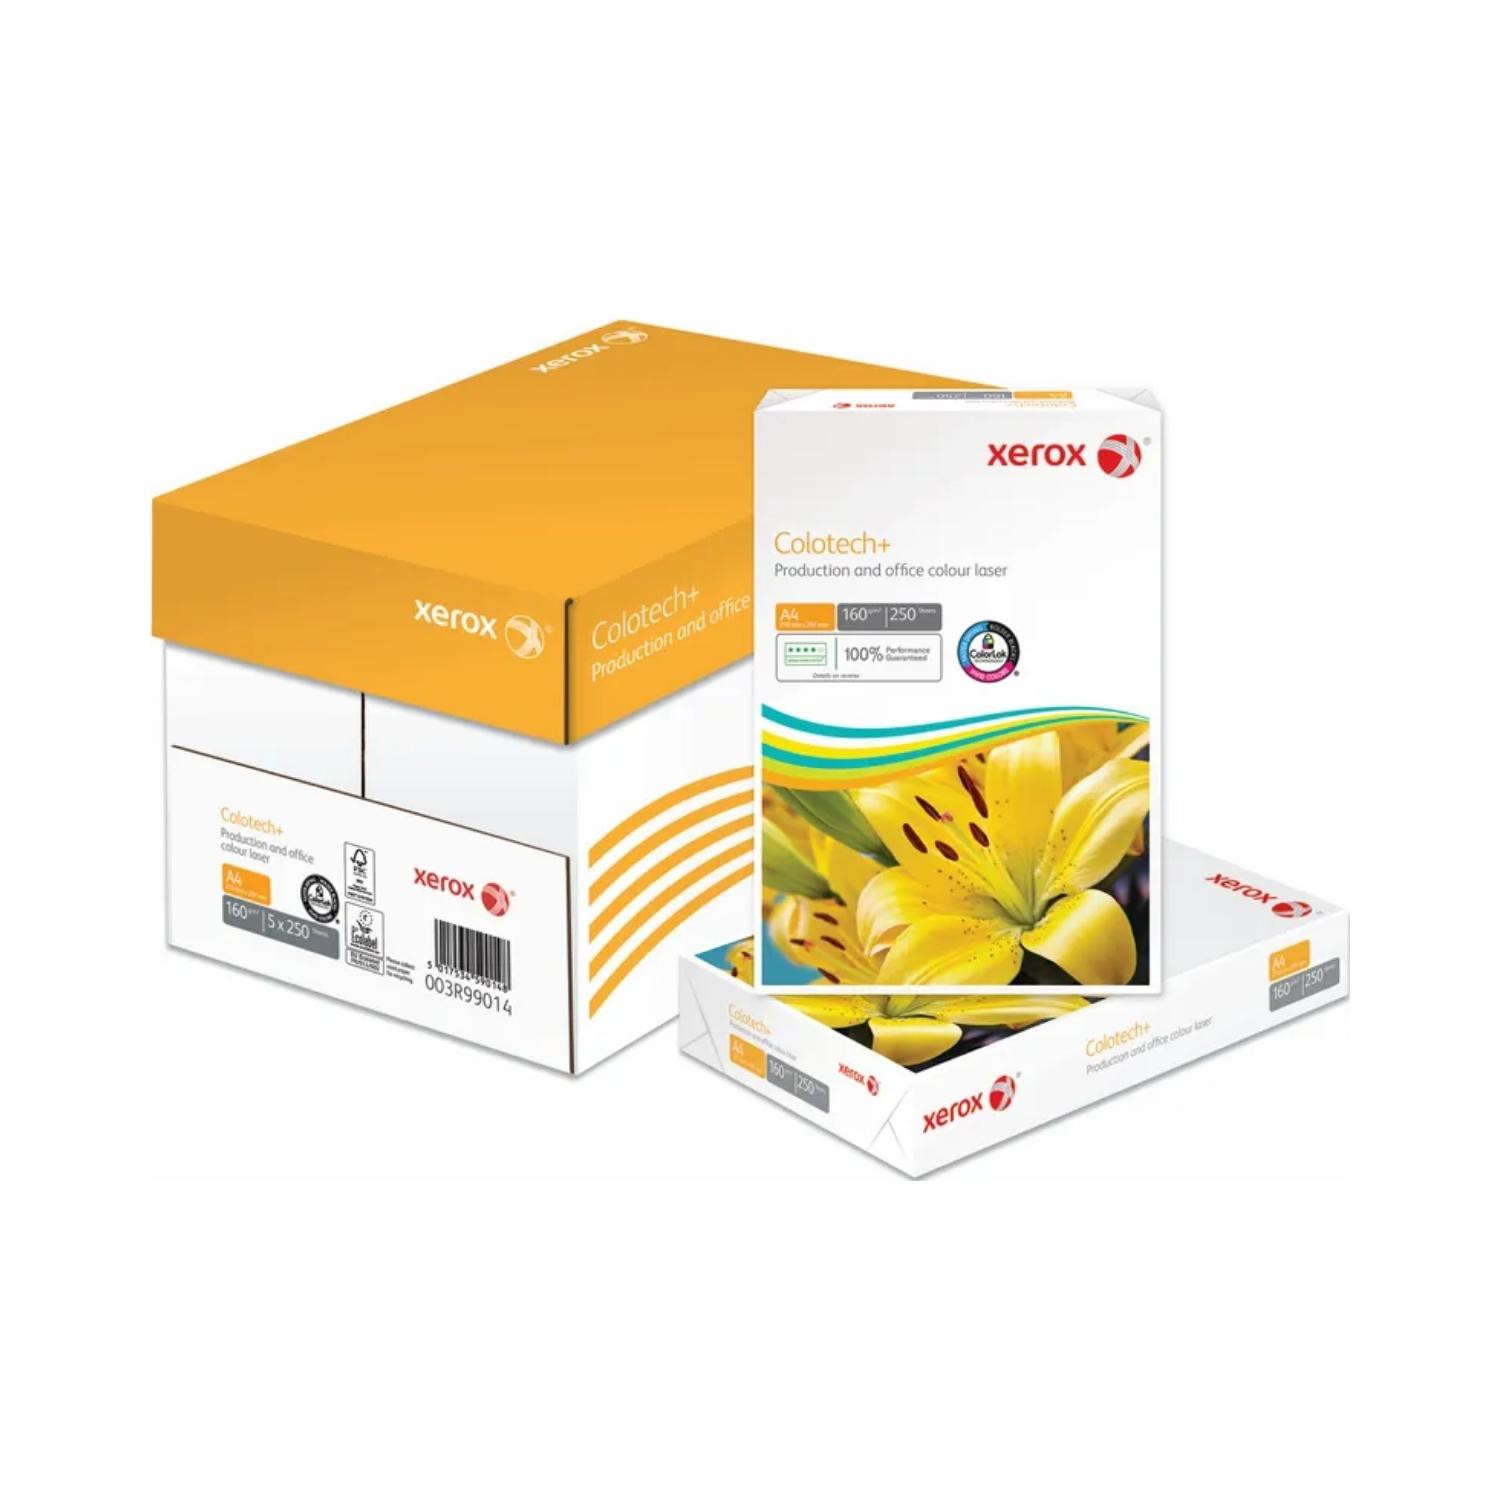 Xerox+Colotech%2B+A4+Super+Smooth+Card+160gsm+White+250+Sheets